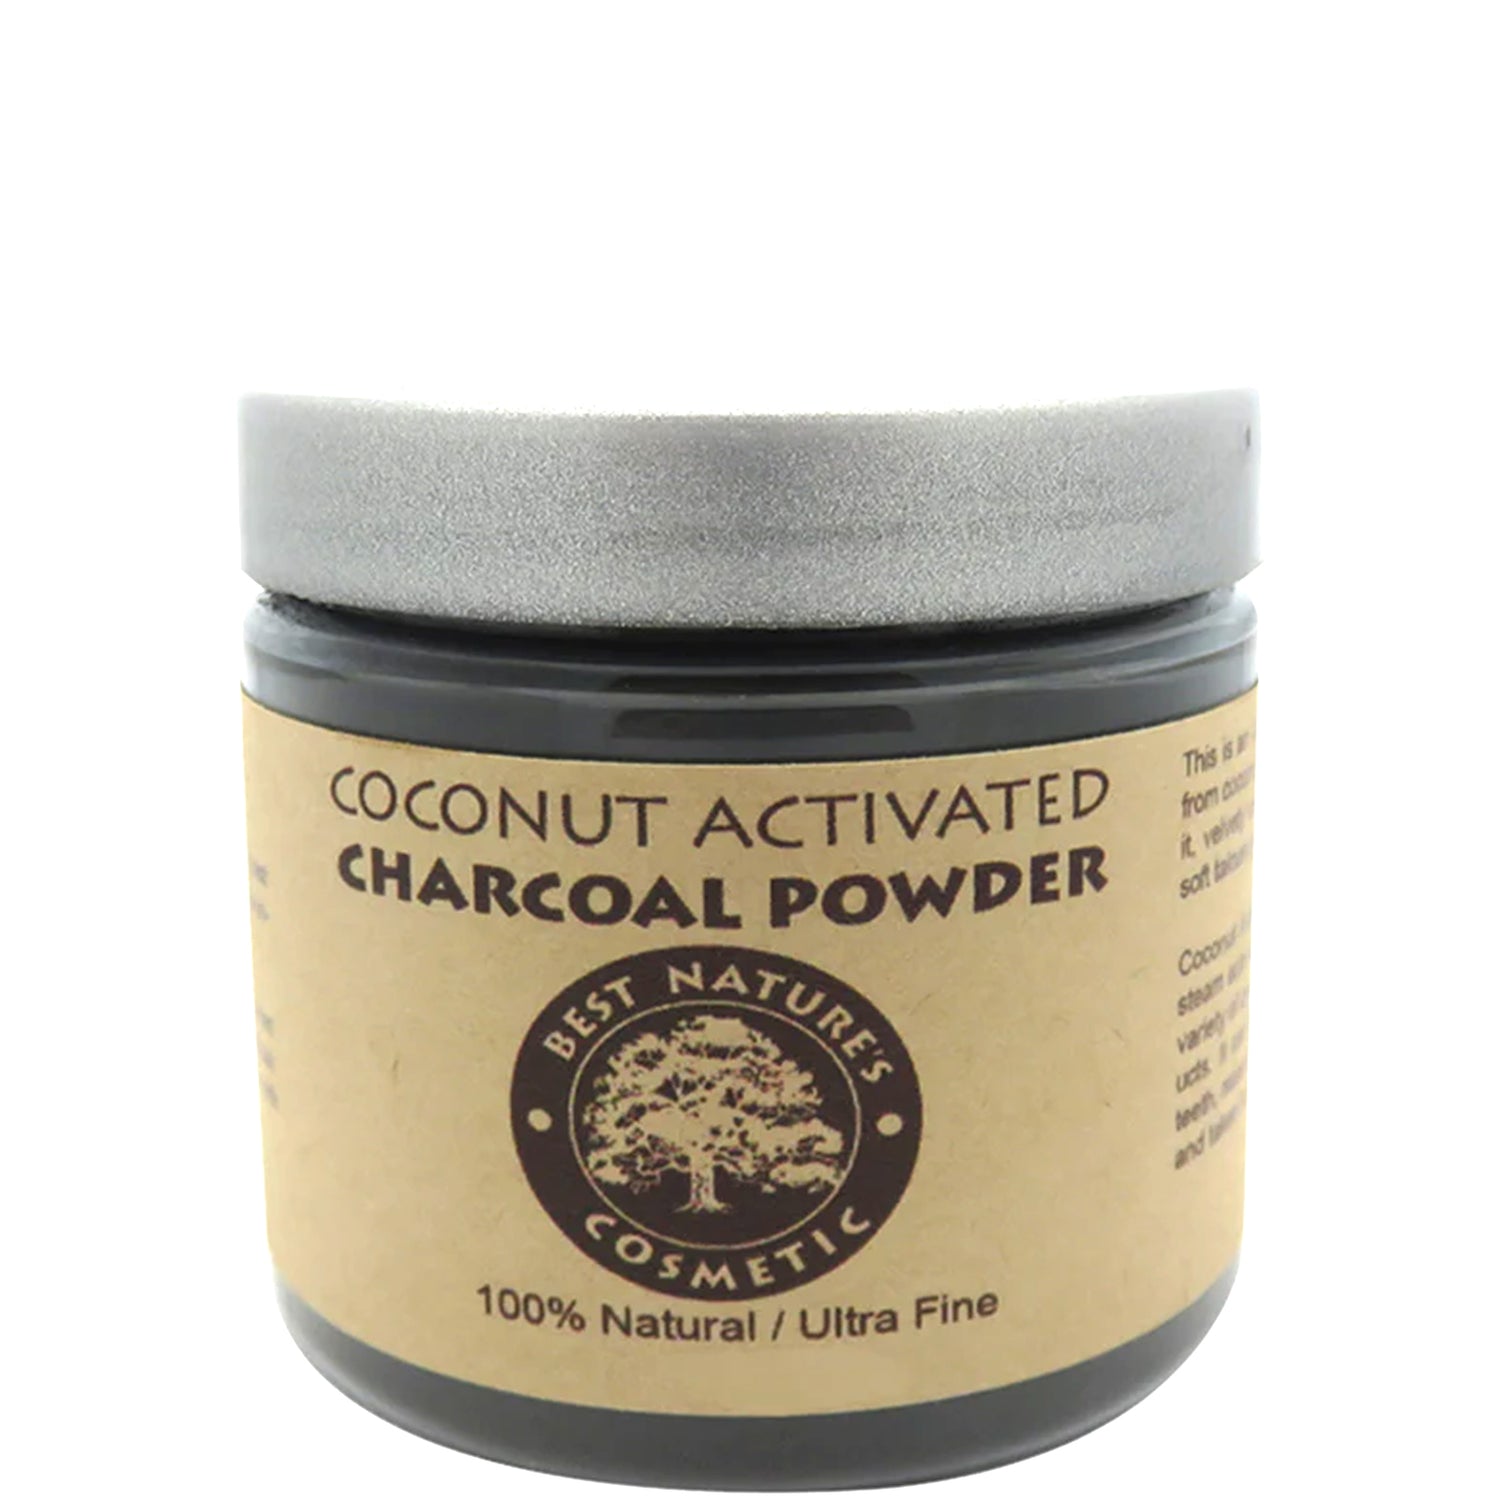 Coconut Activated Charcoal Powder - Natural teeth whitening